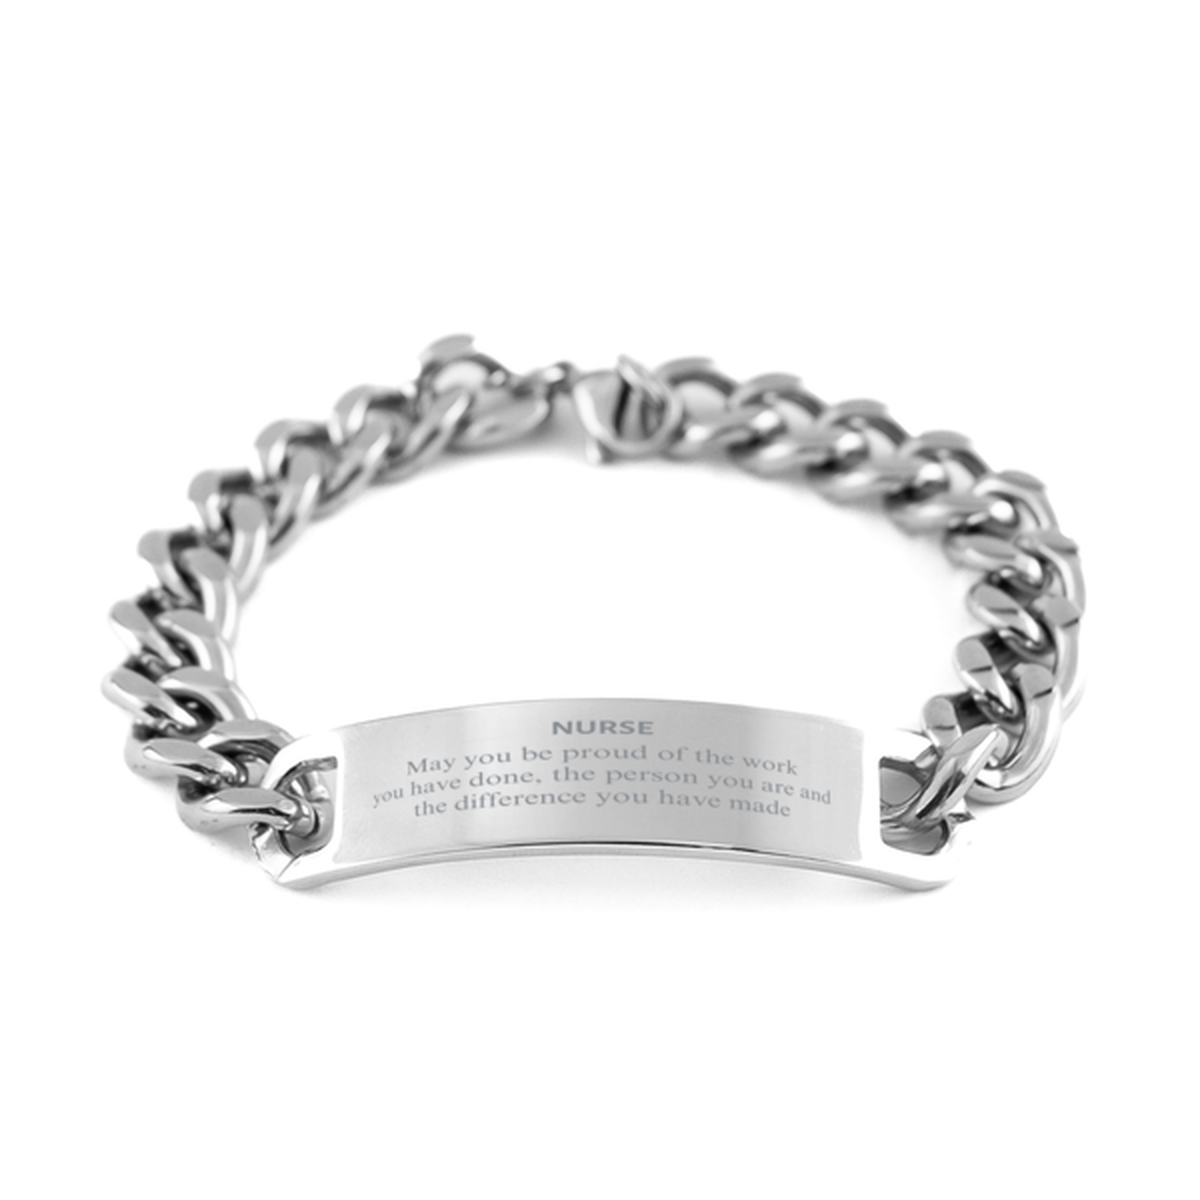 Nurse May you be proud of the work you have done, Retirement Nurse Cuban Chain Stainless Steel Bracelet for Colleague Appreciation Gifts Amazing for Nurse